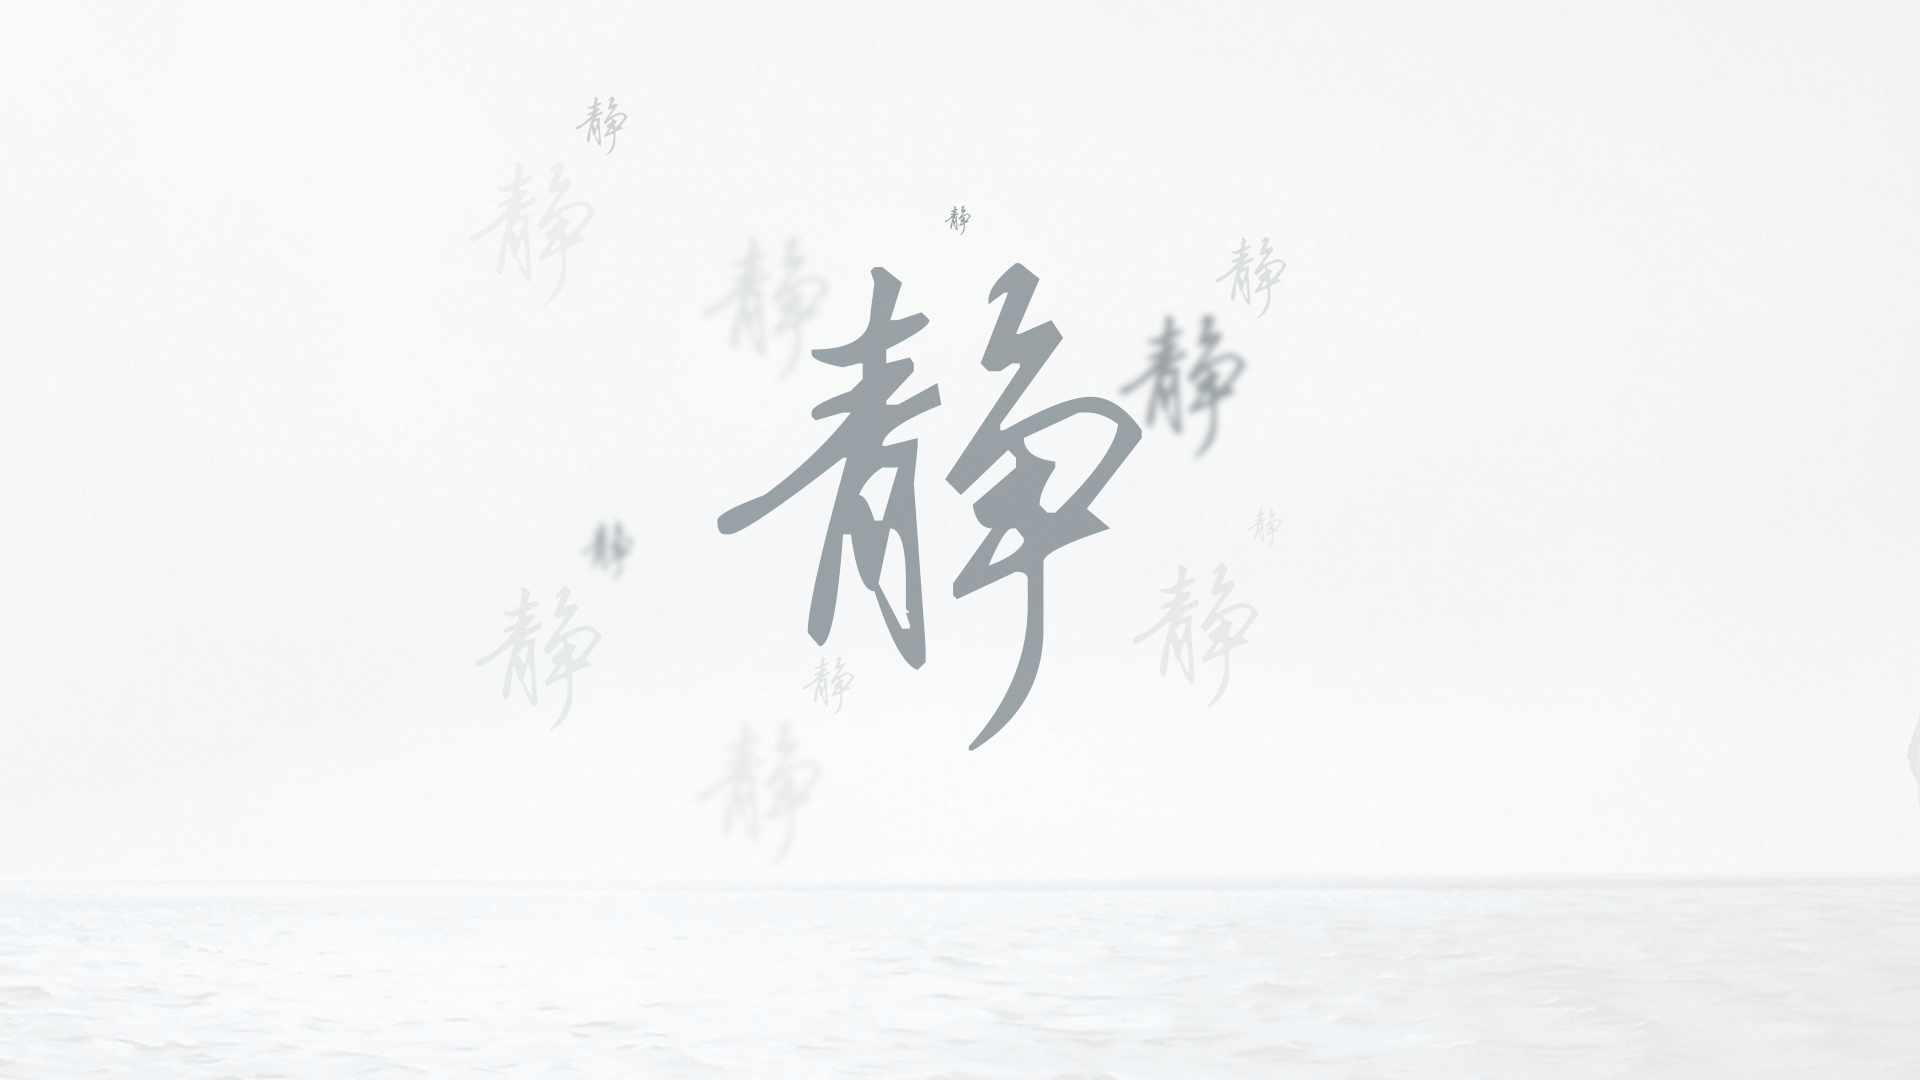 chinese classical 1080P, 2k, 4k HD wallpaper, background free download